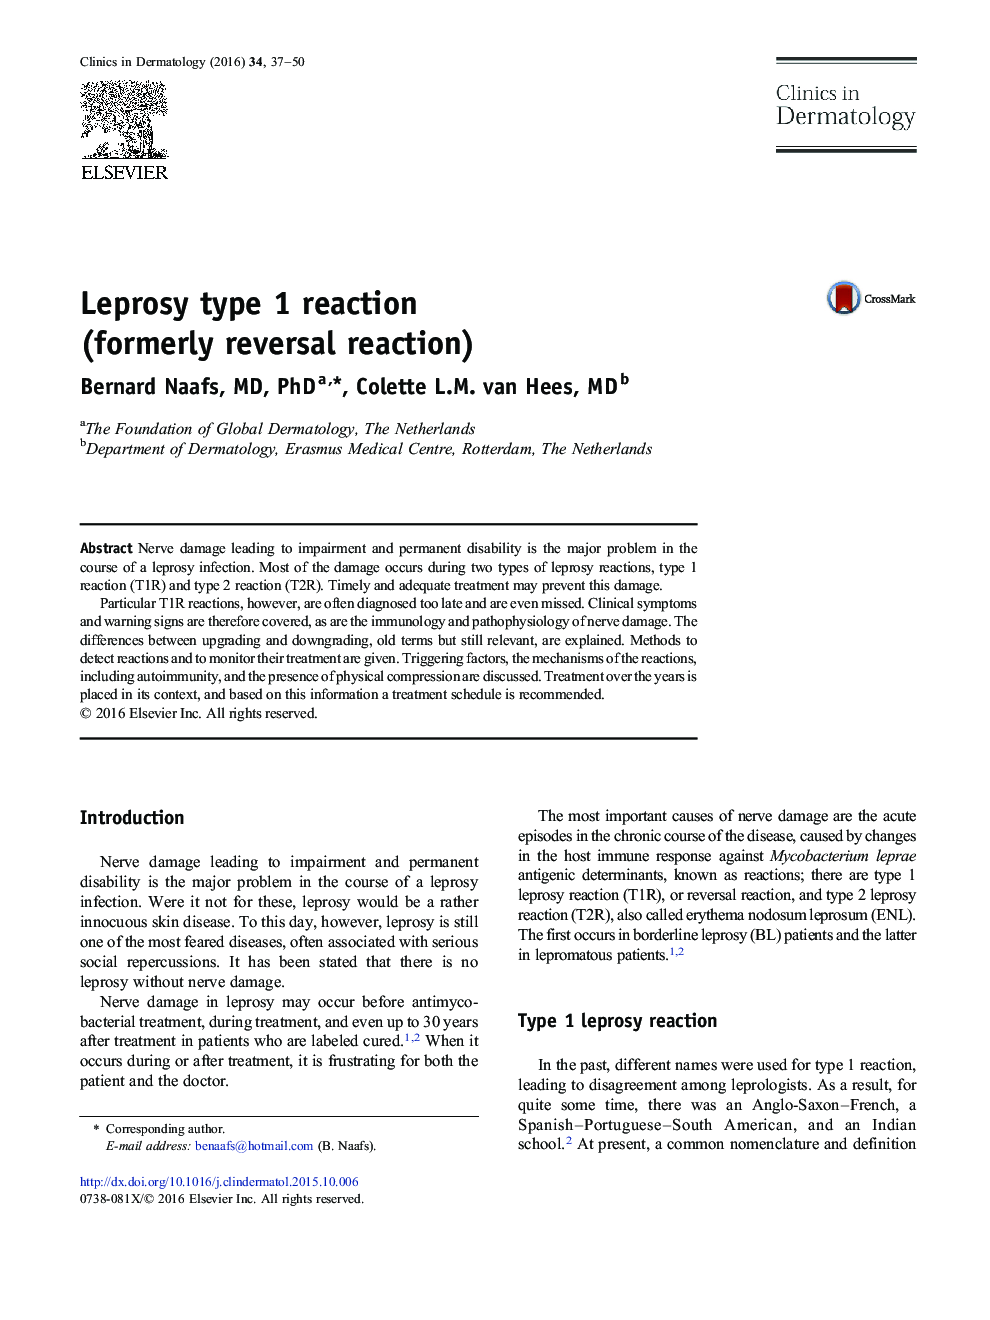 Leprosy type 1 reaction (formerly reversal reaction)